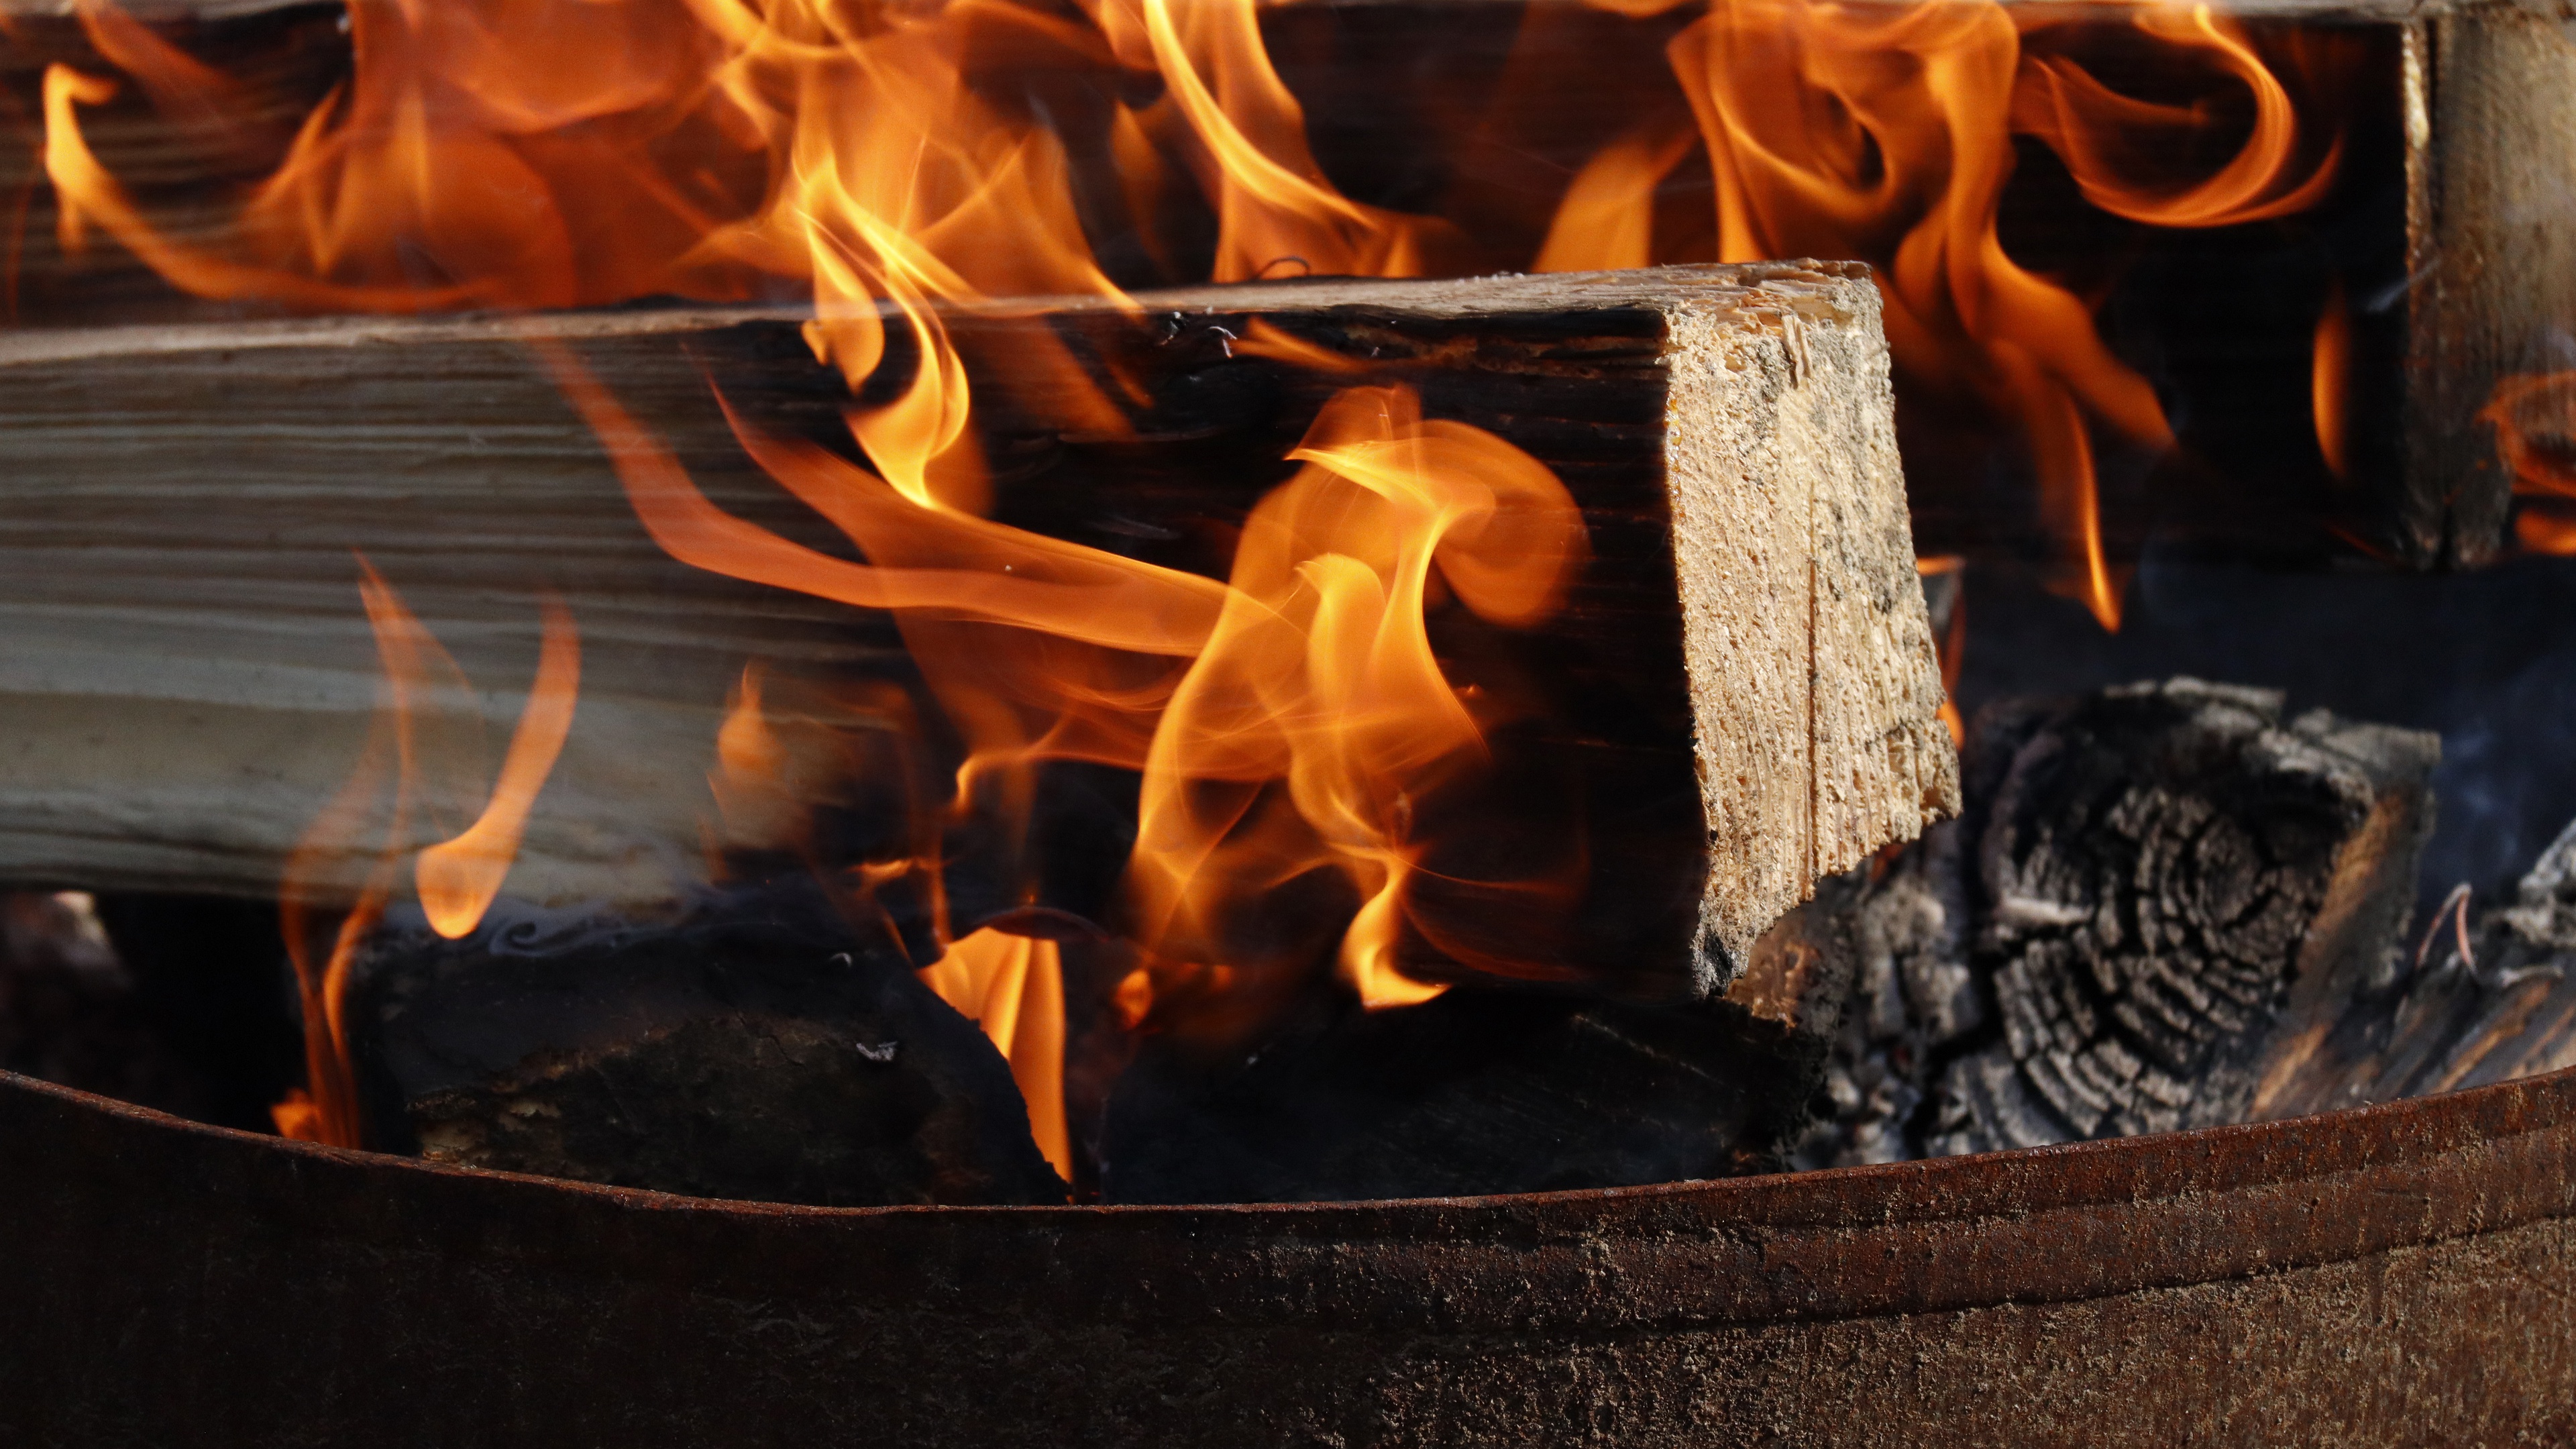 photography, fire, close up, firewood, flame